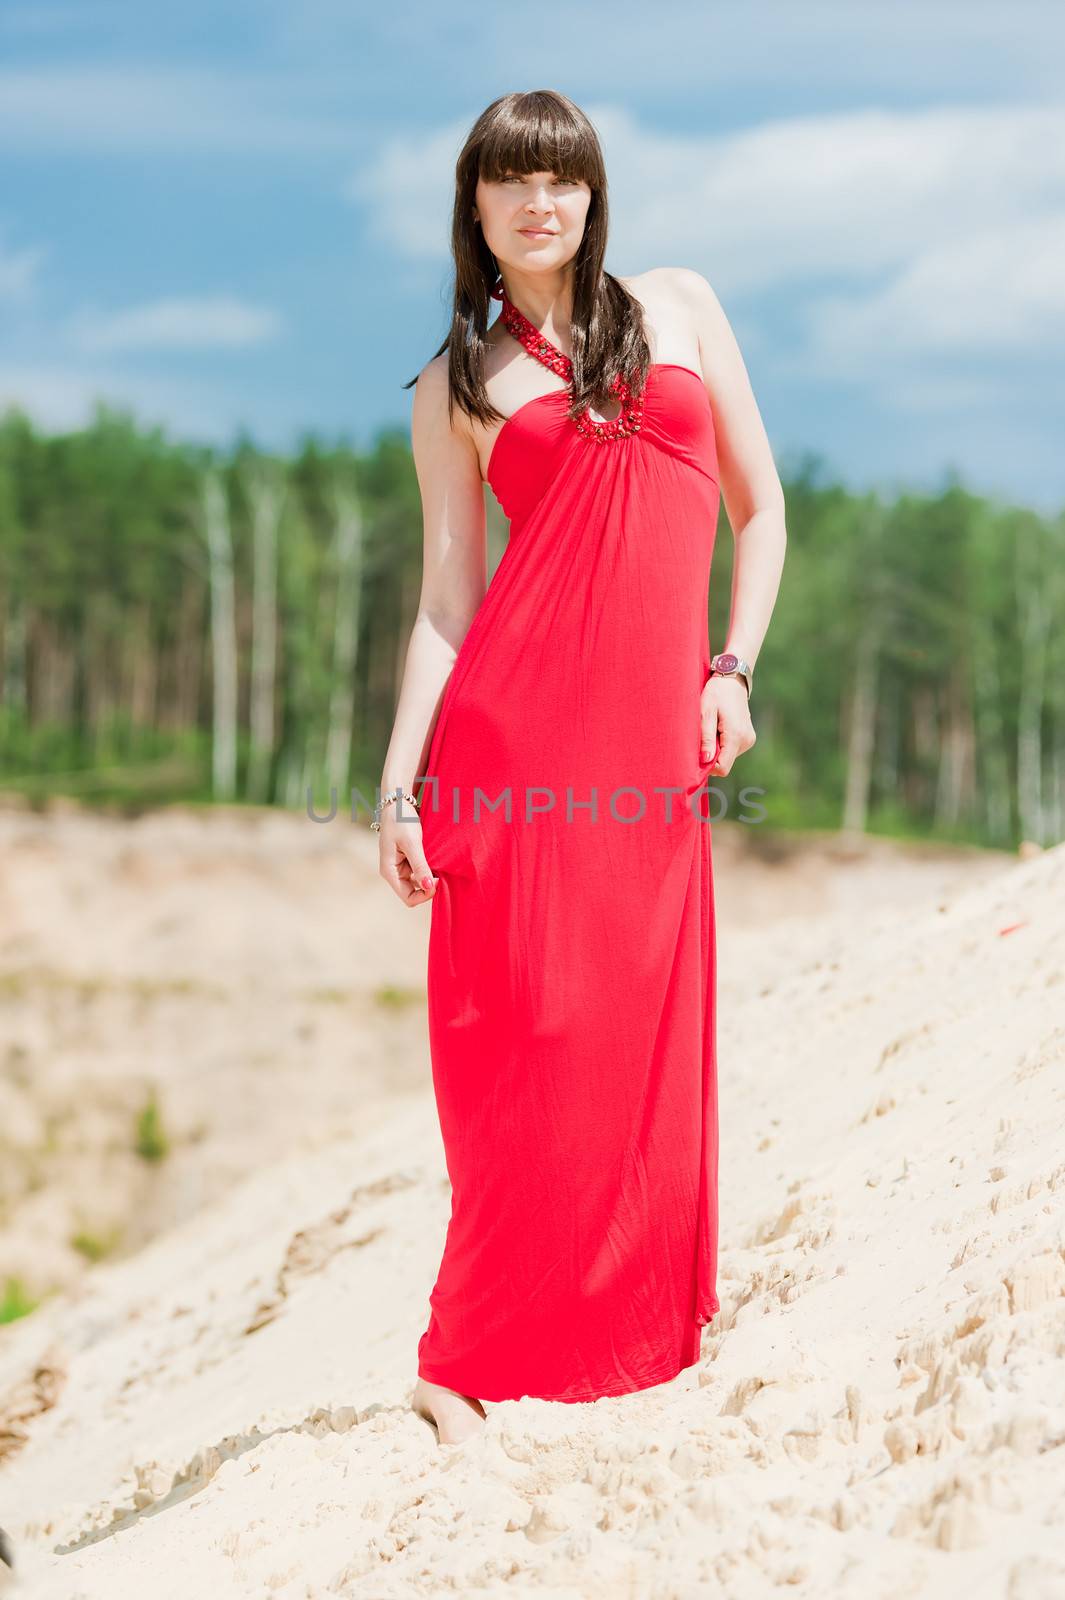 A girl in a red dress posing on a sand dune